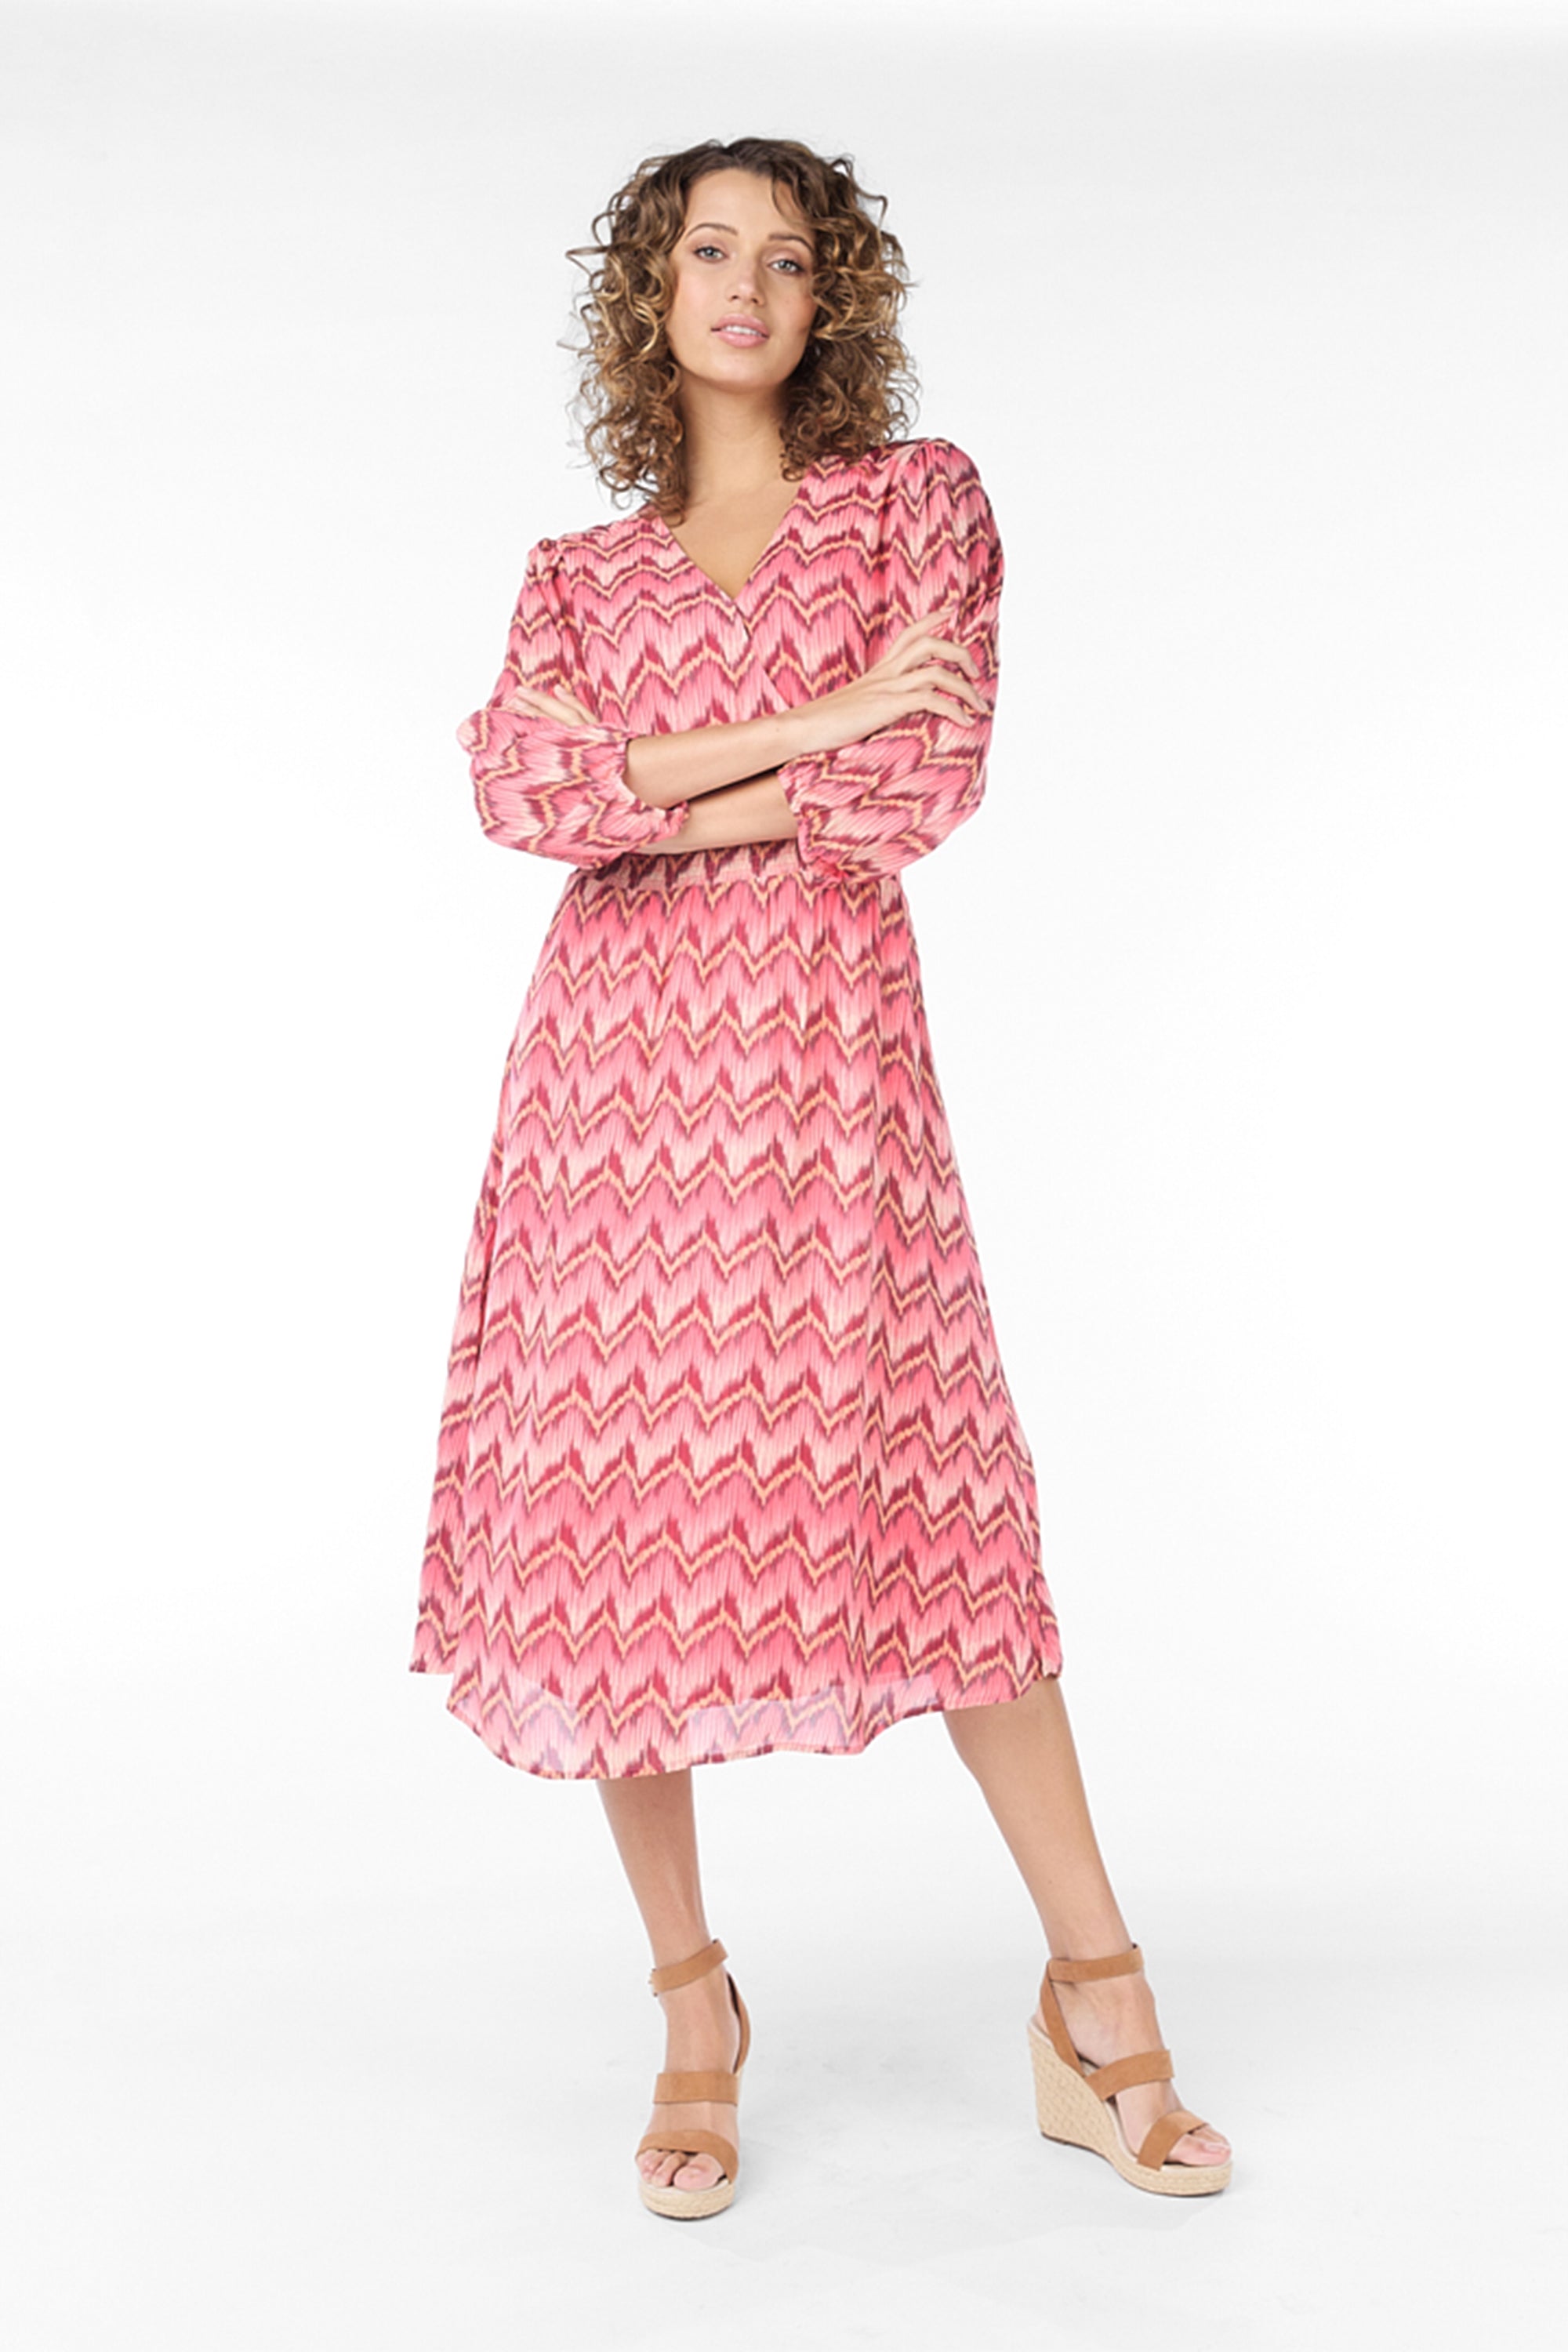 Front view of Esqualo (SP2414008) Women's 3/4 Sleeve V-Neck Midi Day Dress in a Pink ZigZag Print